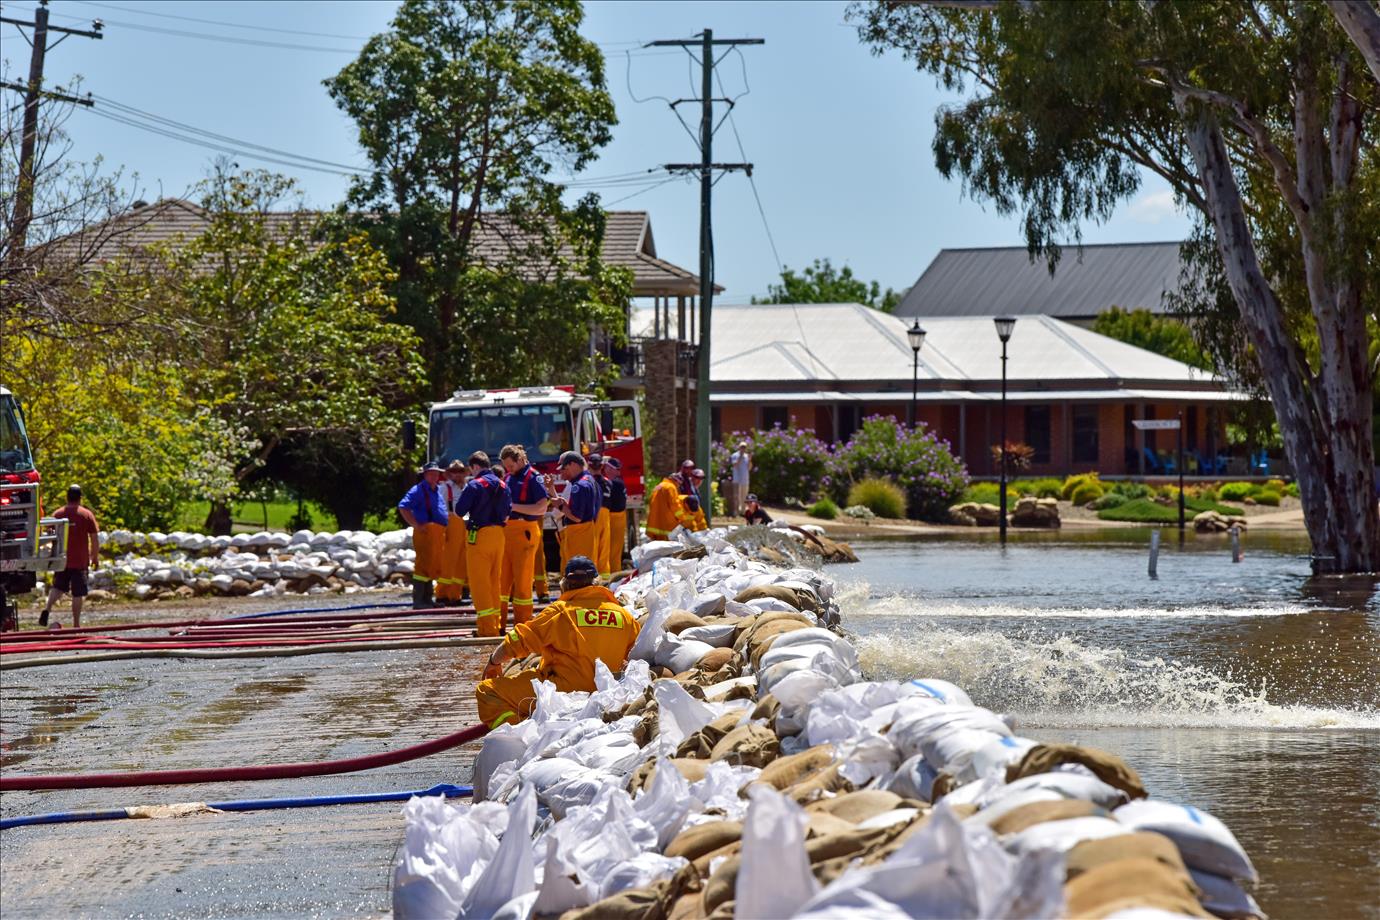 Beyond A State Of Sandbagging: What Can We Learn From All The Floods, Here And Overseas?